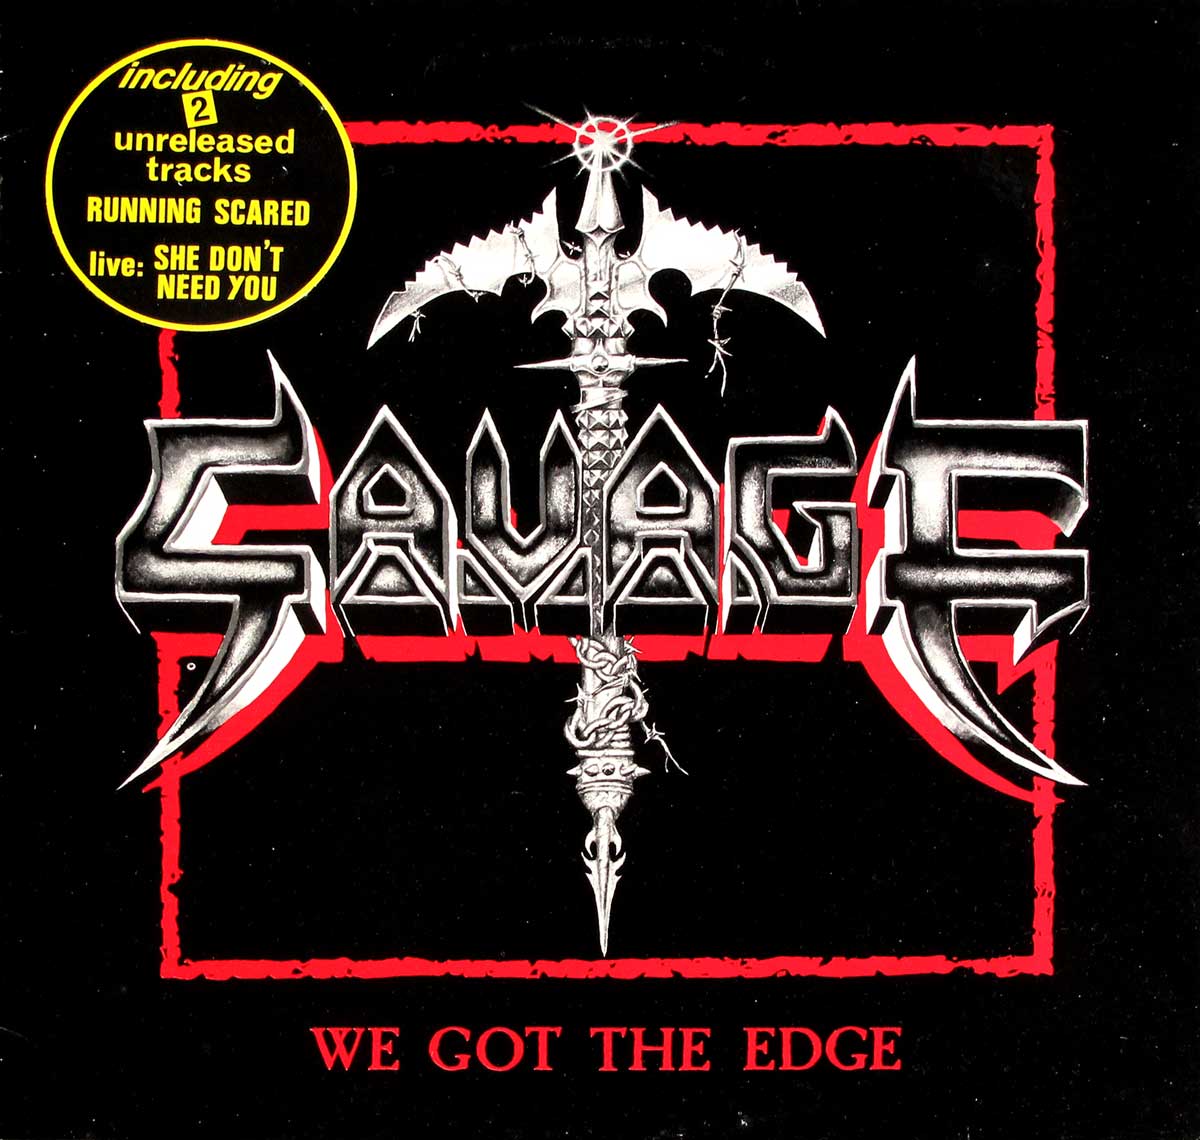 High Quality Photo of Album Front Cover  "SAVAGE - We got the Edge / Running Scared / She Don't Need You"